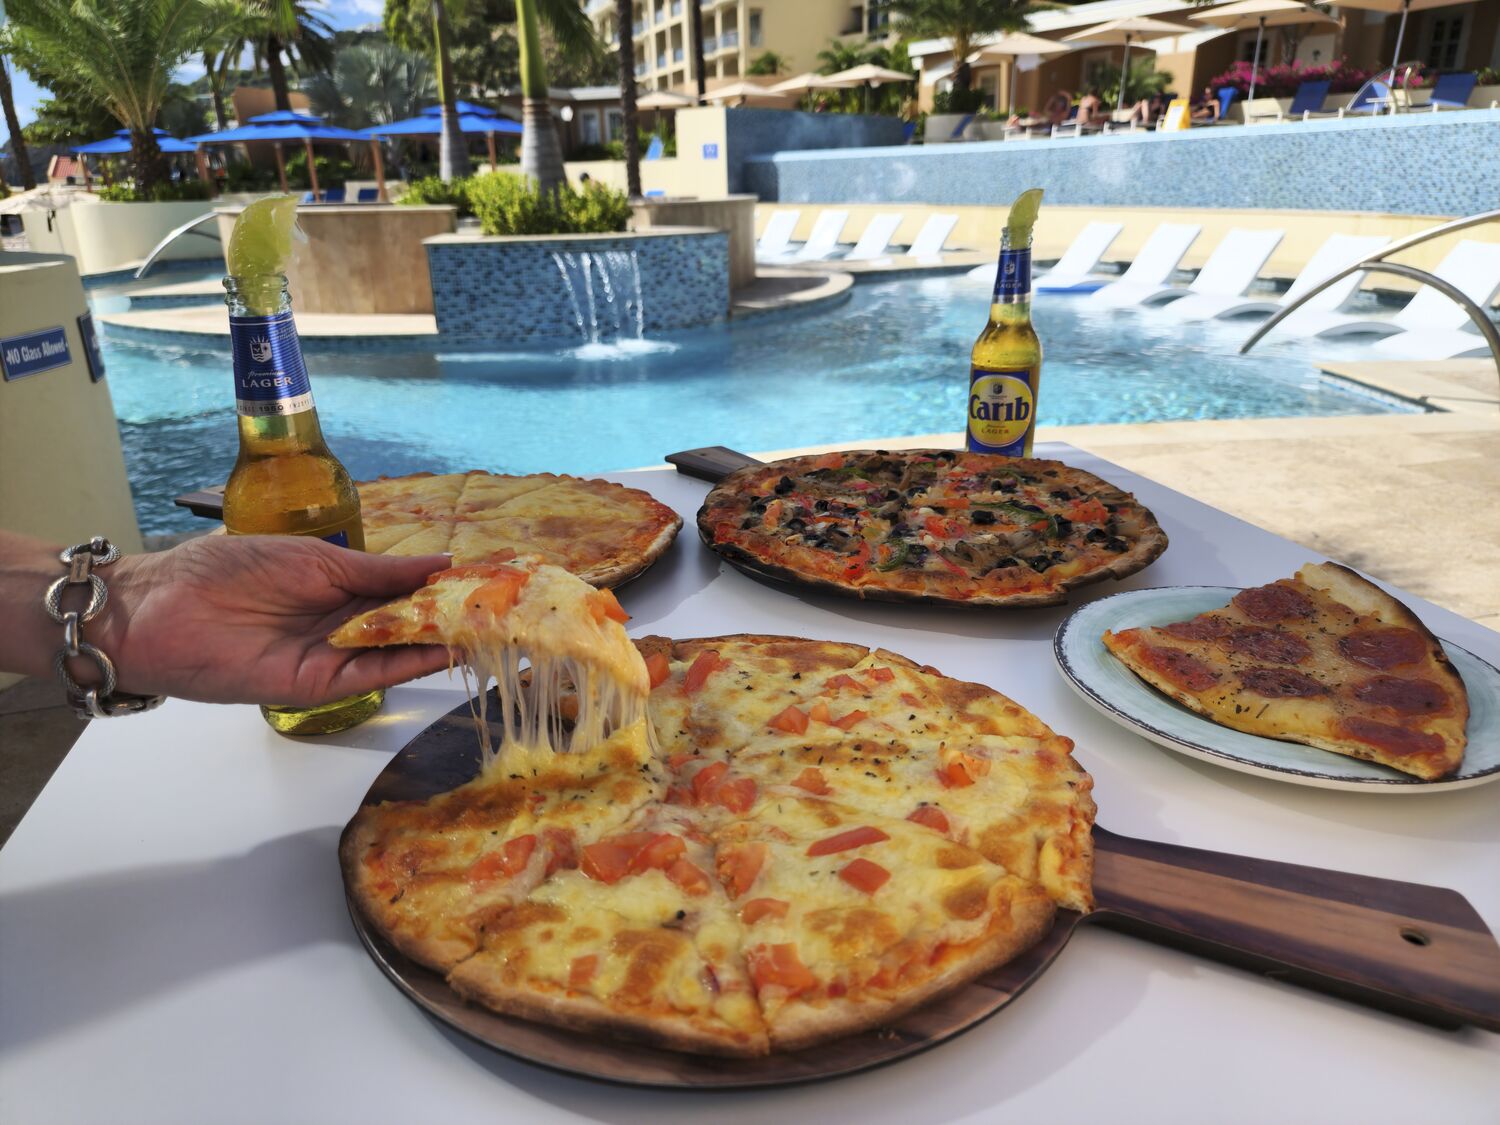 Slice pizzas and view of the pureocean pool behind it